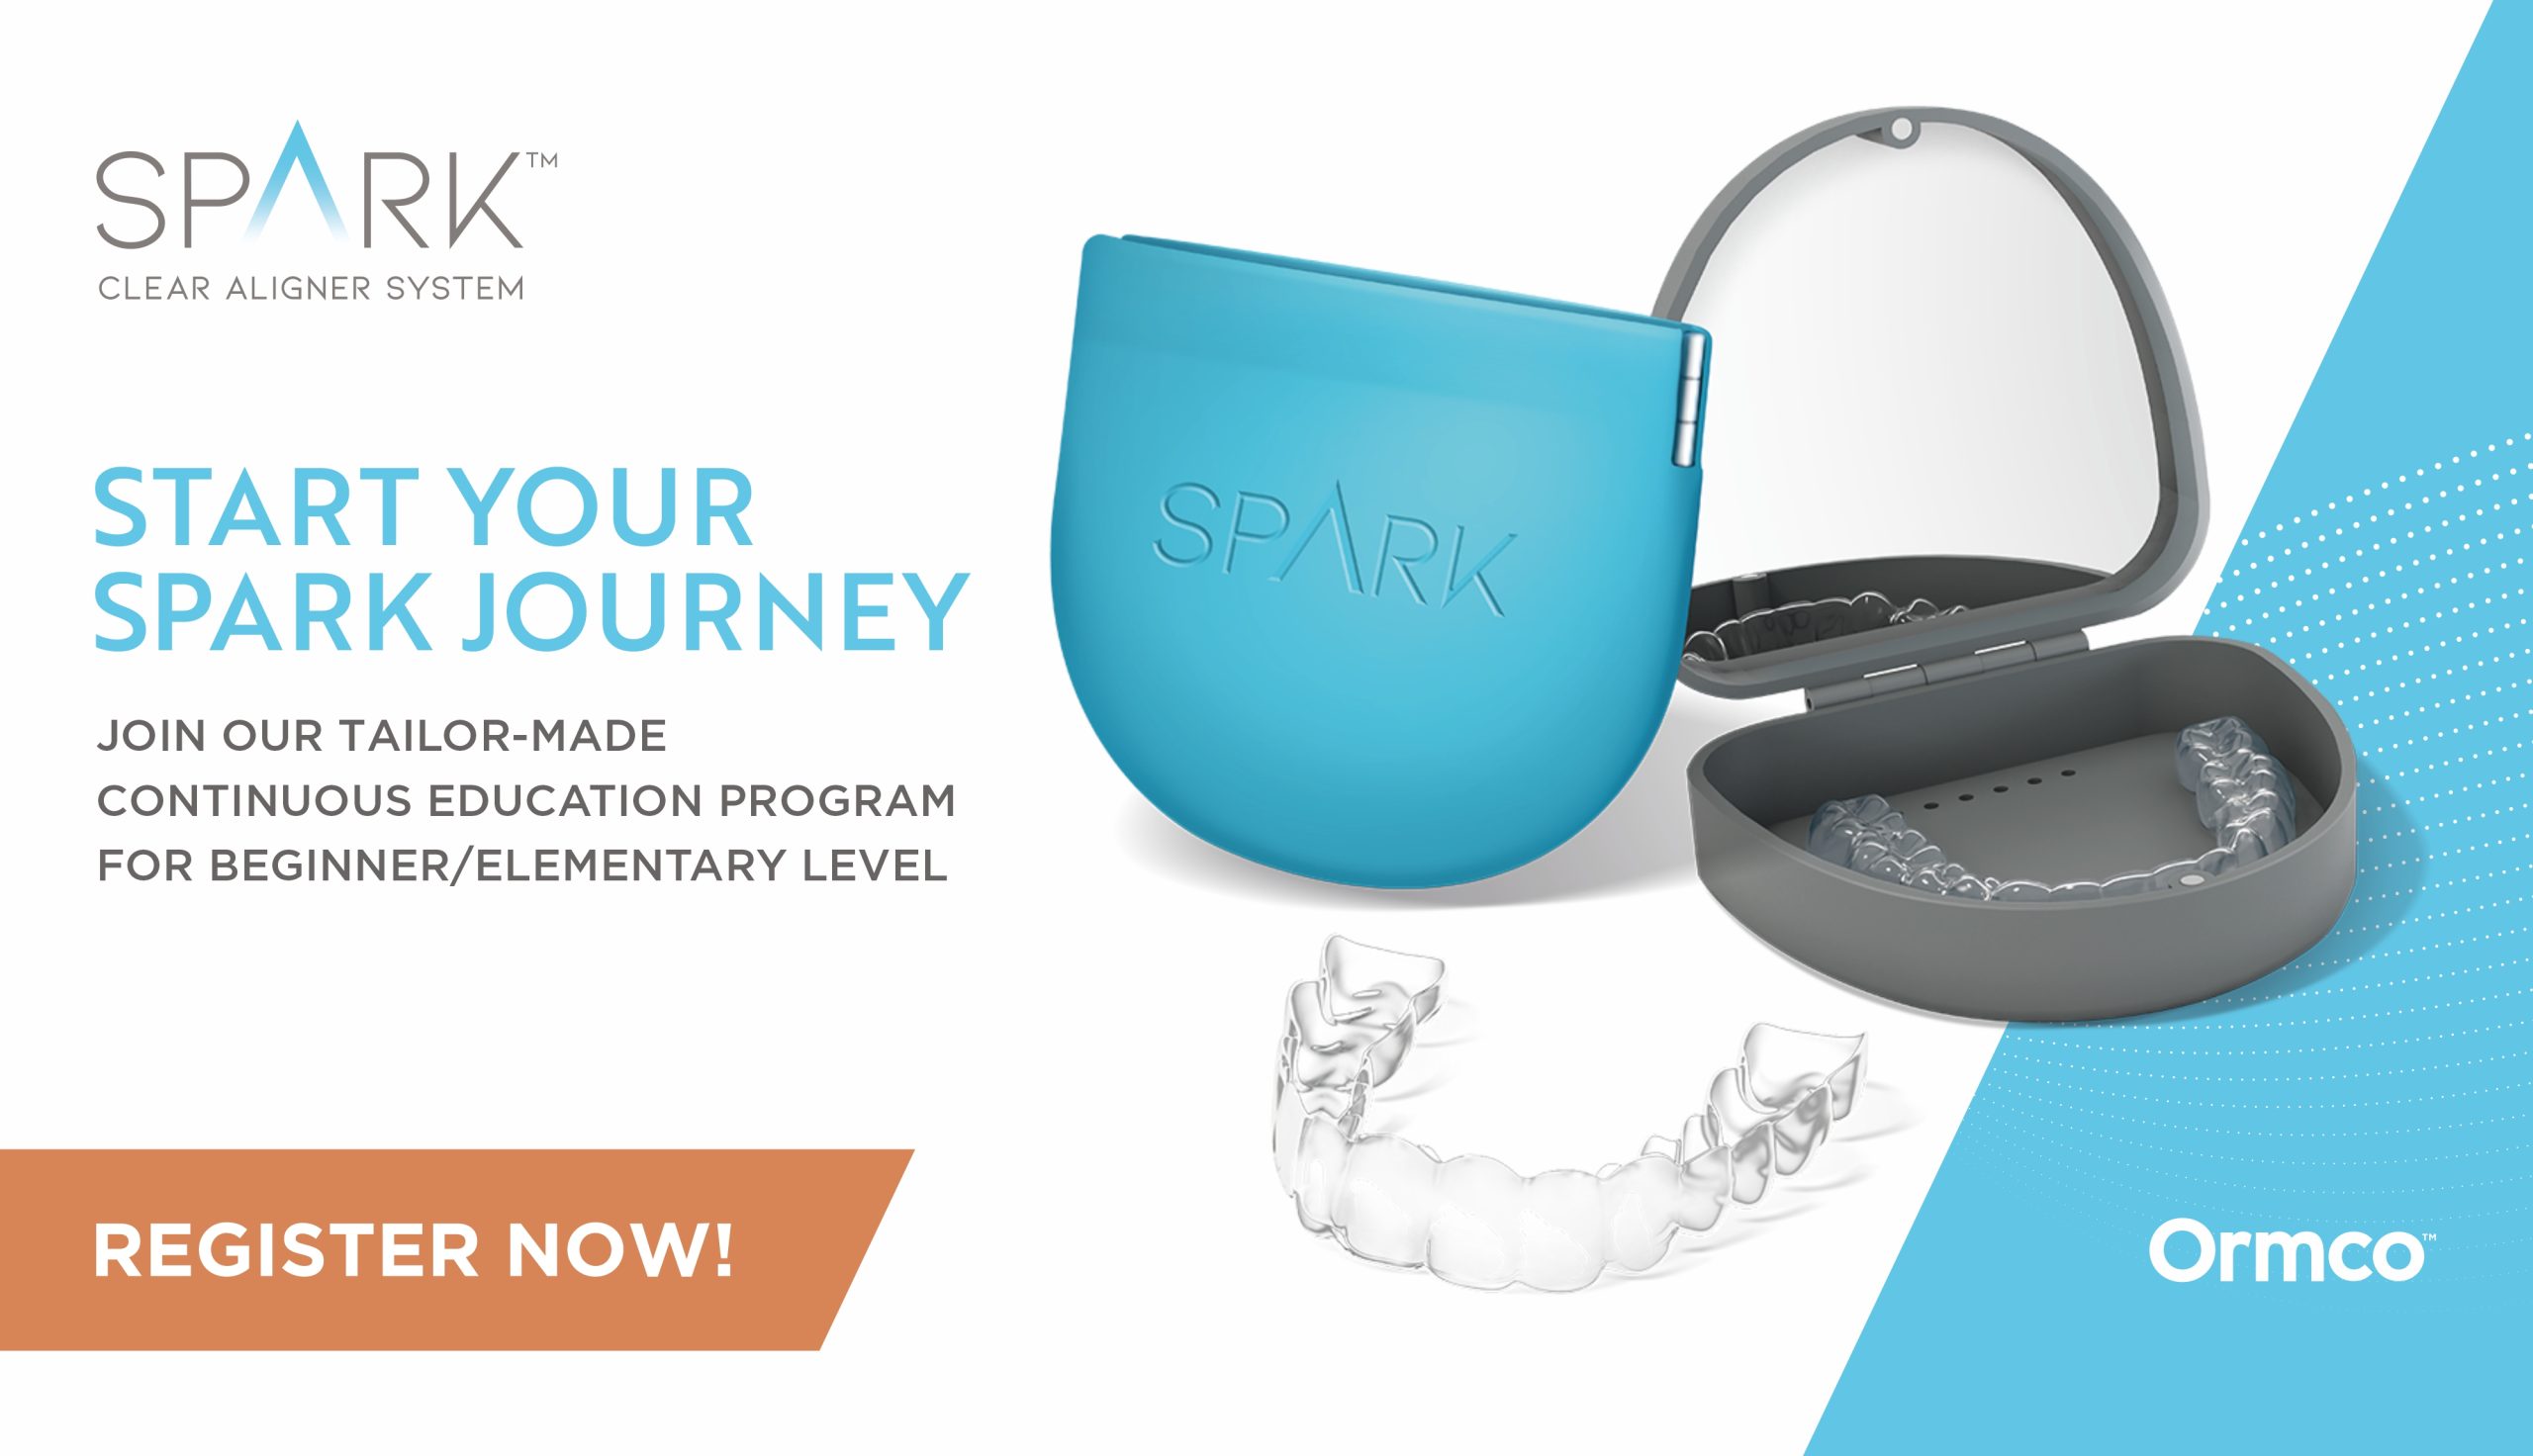 With not long to go until the Spark Aligner educational course, find out why you should start your Spark journey now. 